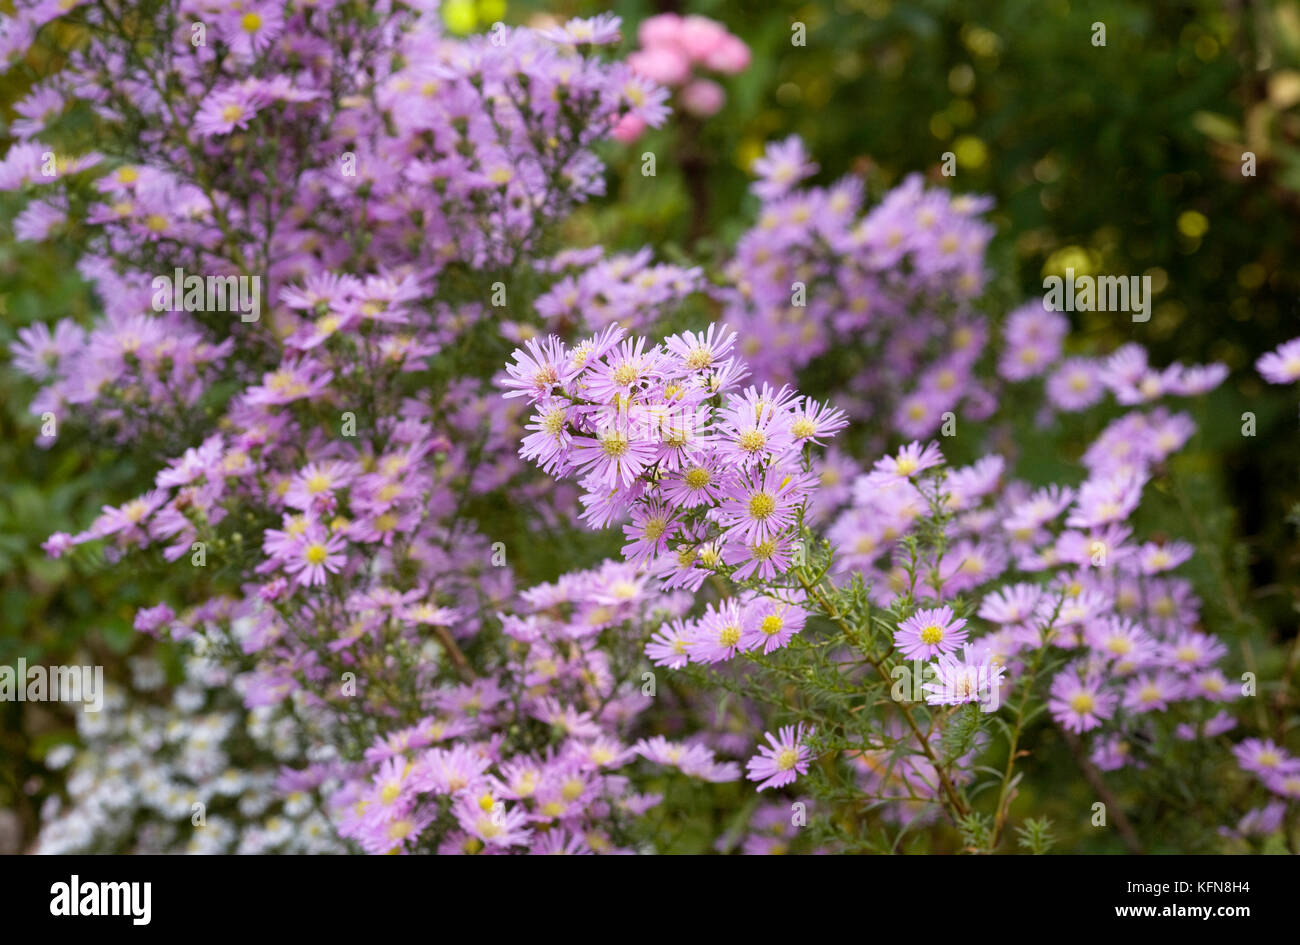 Symphyotrichum, Asters in the garden. Stock Photo